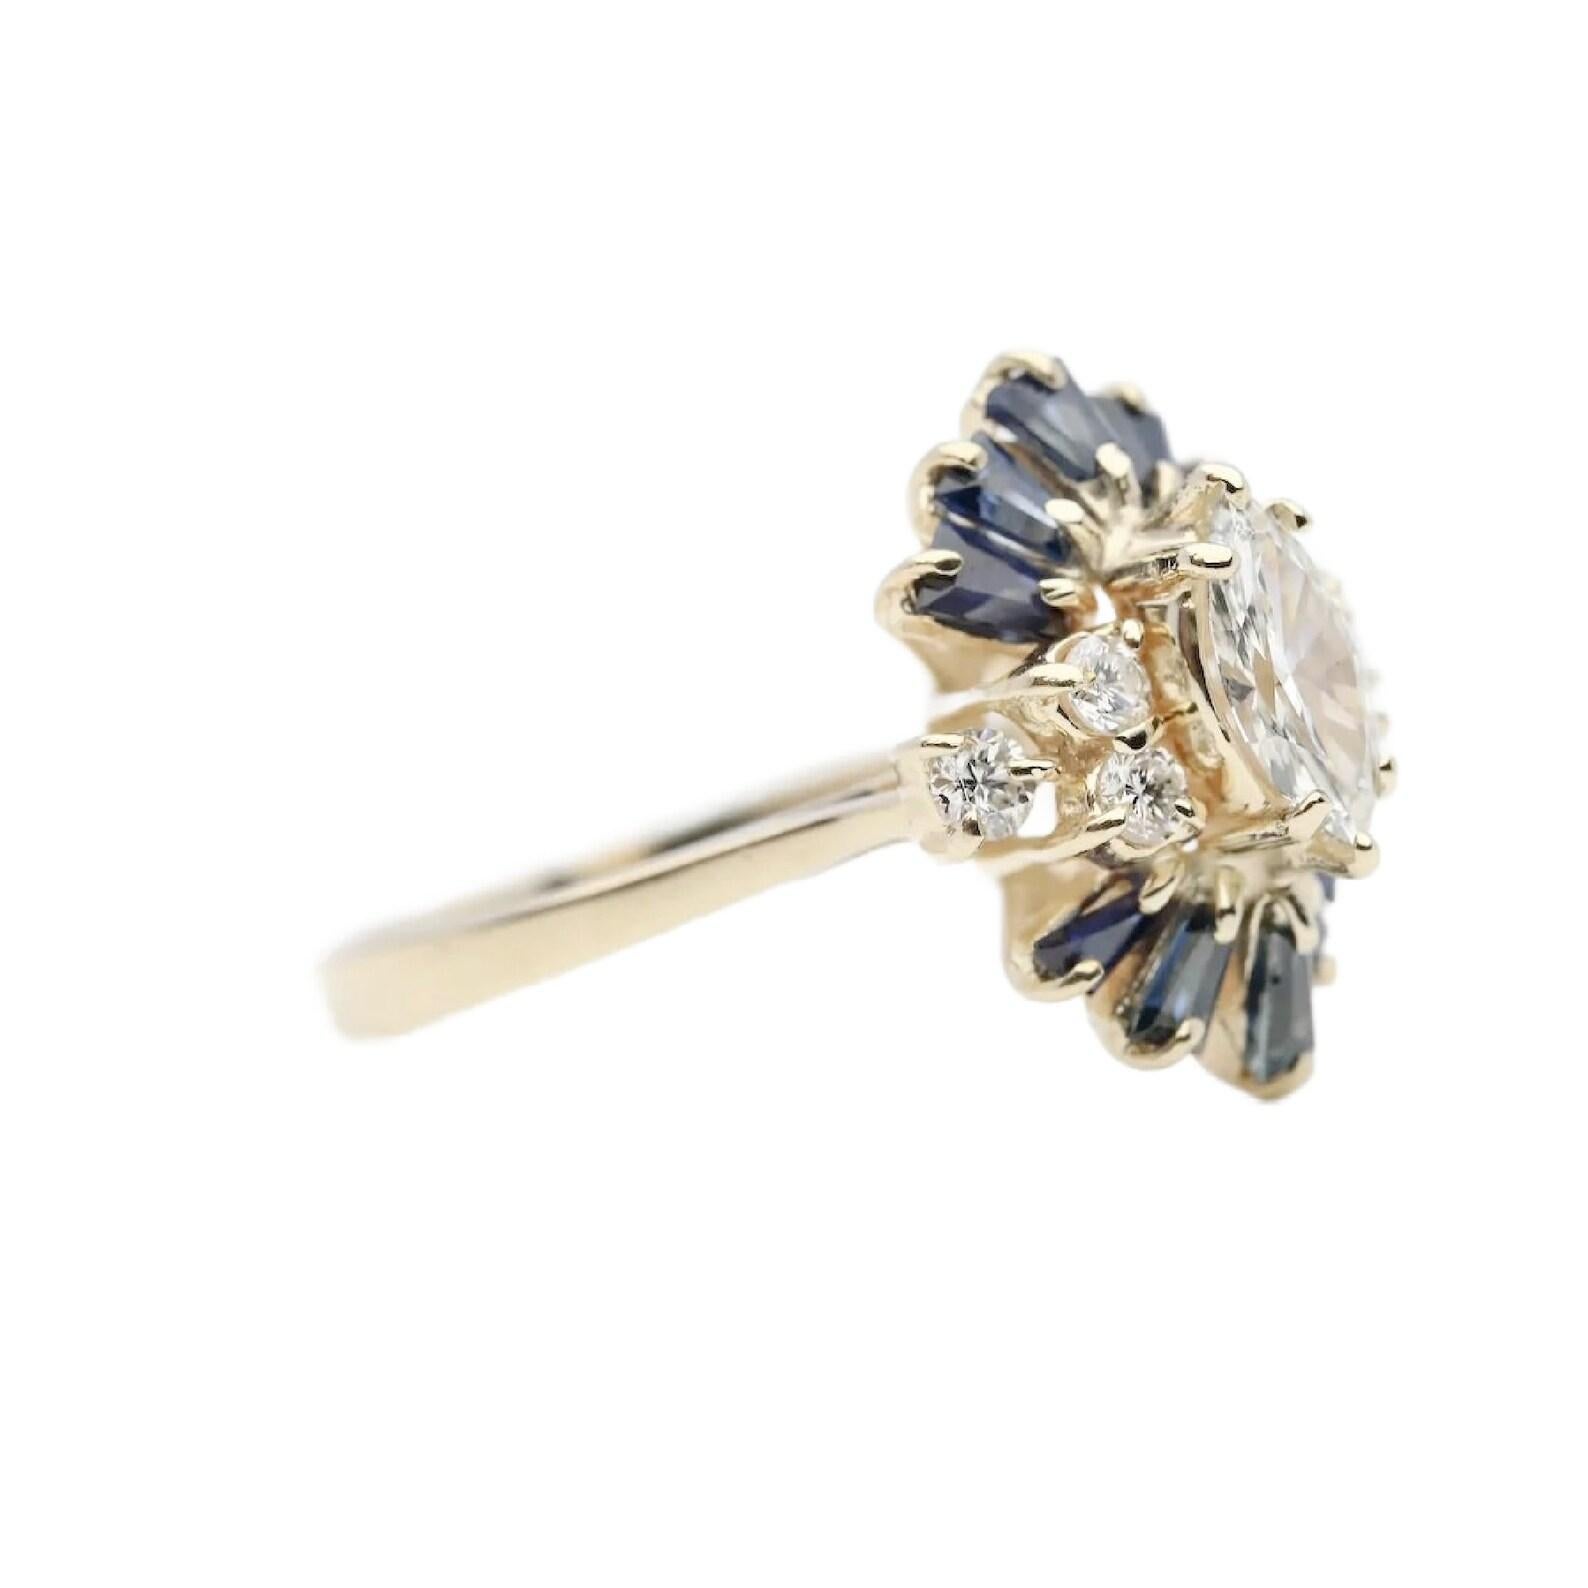 A vintage mid century marquise diamond and sapphire cocktail cluster ring in 14 karat yellow gold. Centering this unique ring is a 0.50 carat I color VS2 clarity marquise cut diamond. Framing the marquise diamond are six round diamonds weighing a